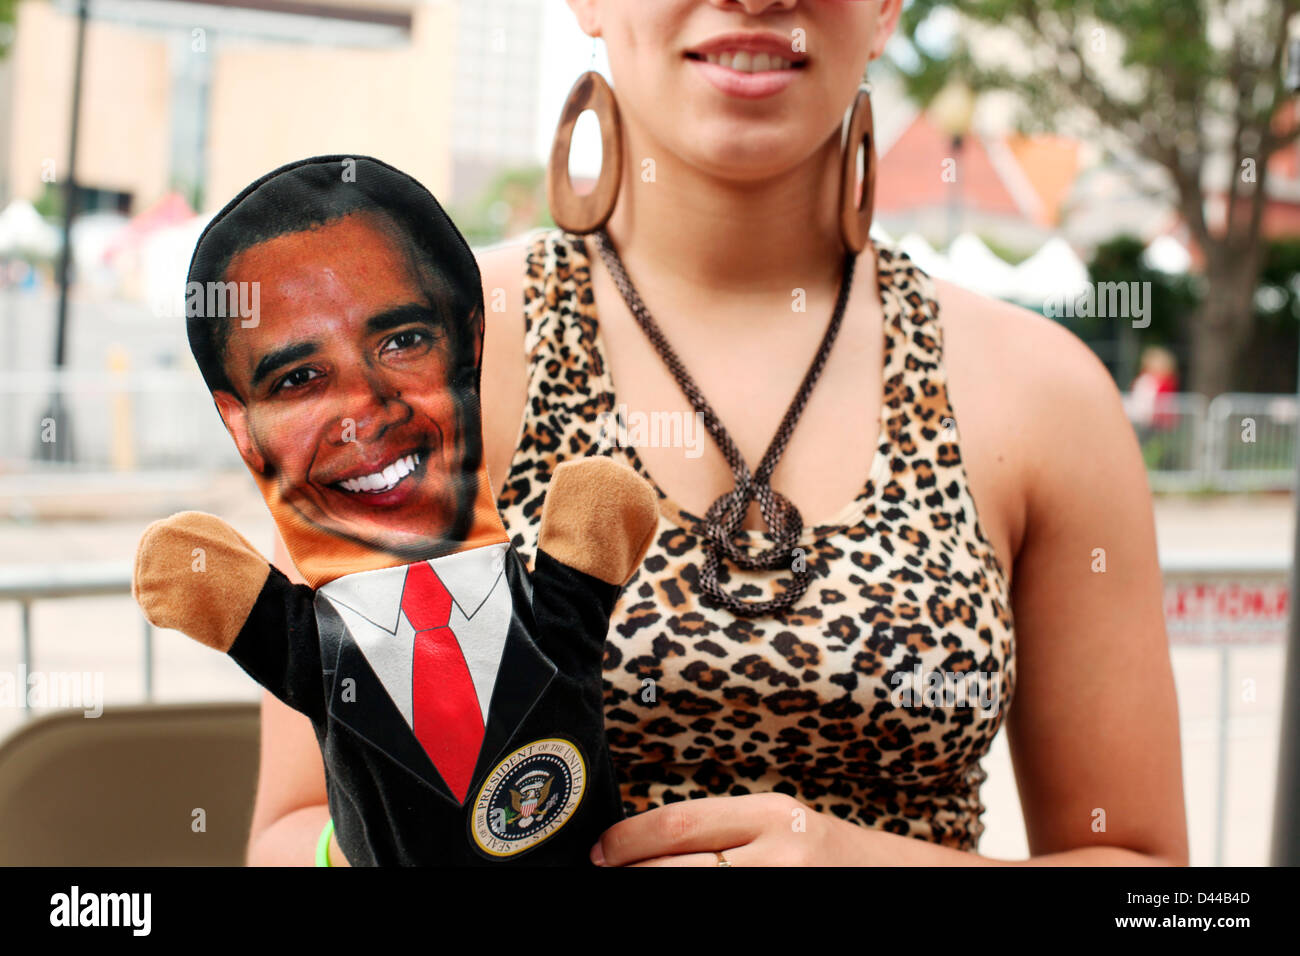 Democratic supporters sell Obama hand-puppets and memorabilia in Charlotte NC, outside the Democratic National Convention. Stock Photo